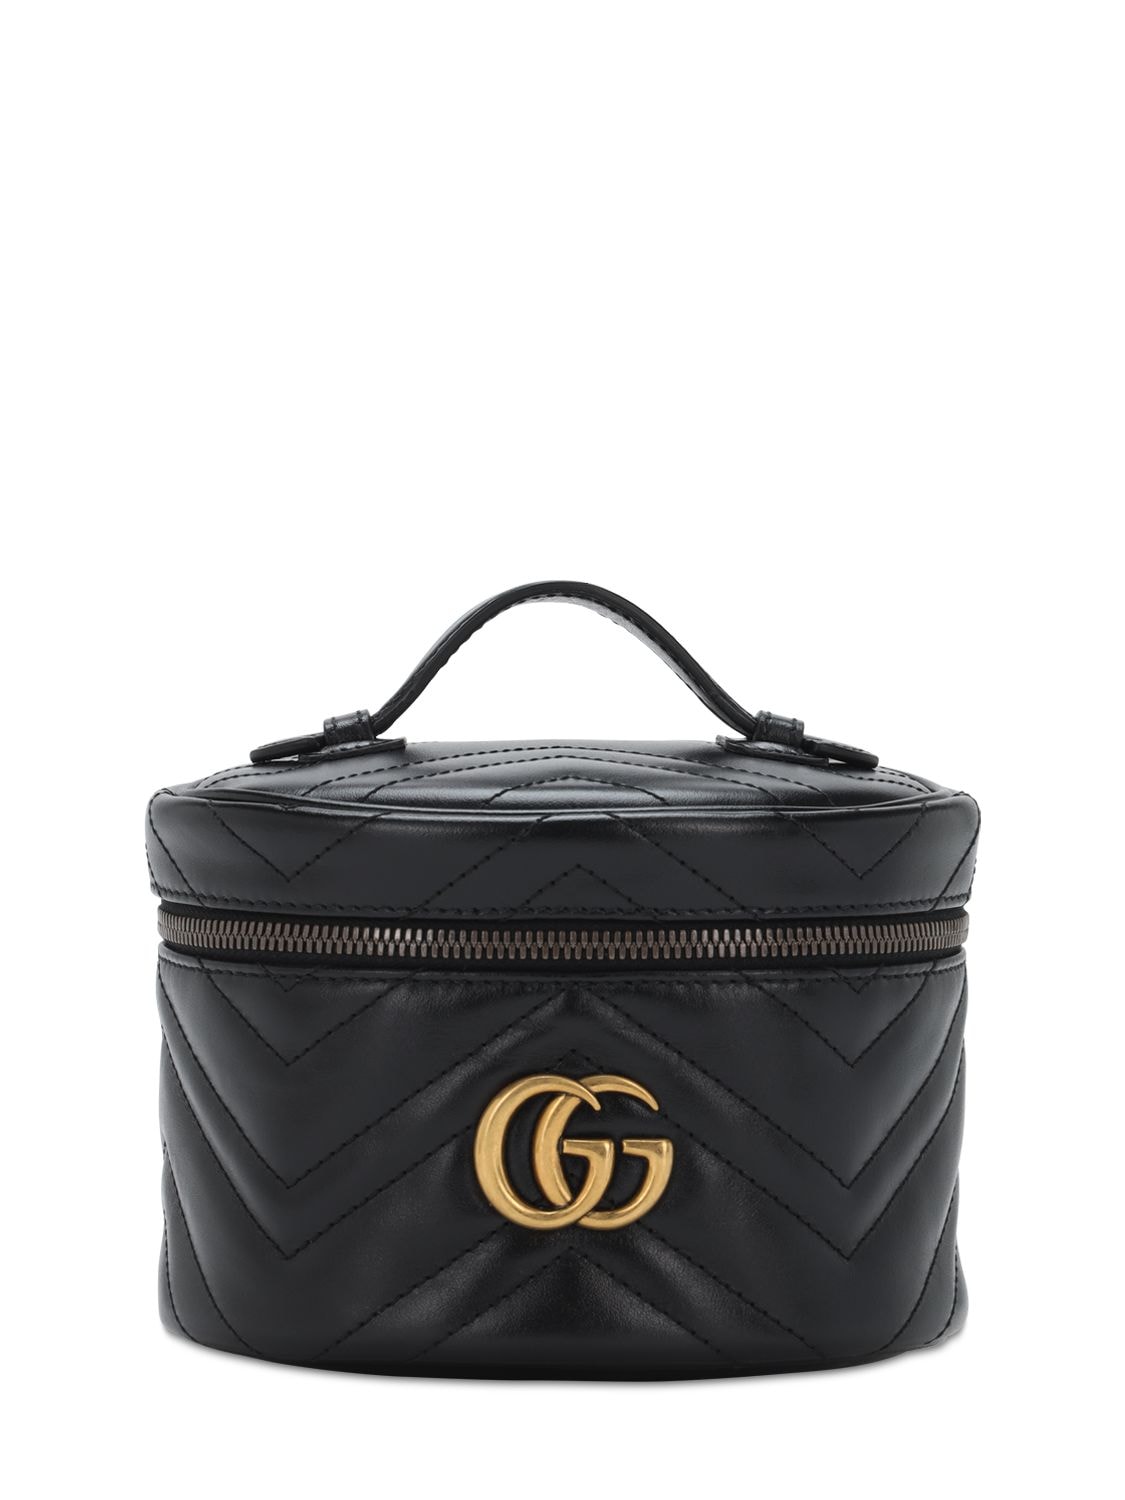 Gucci Gg Marmont Leather Beauty Bag In Black